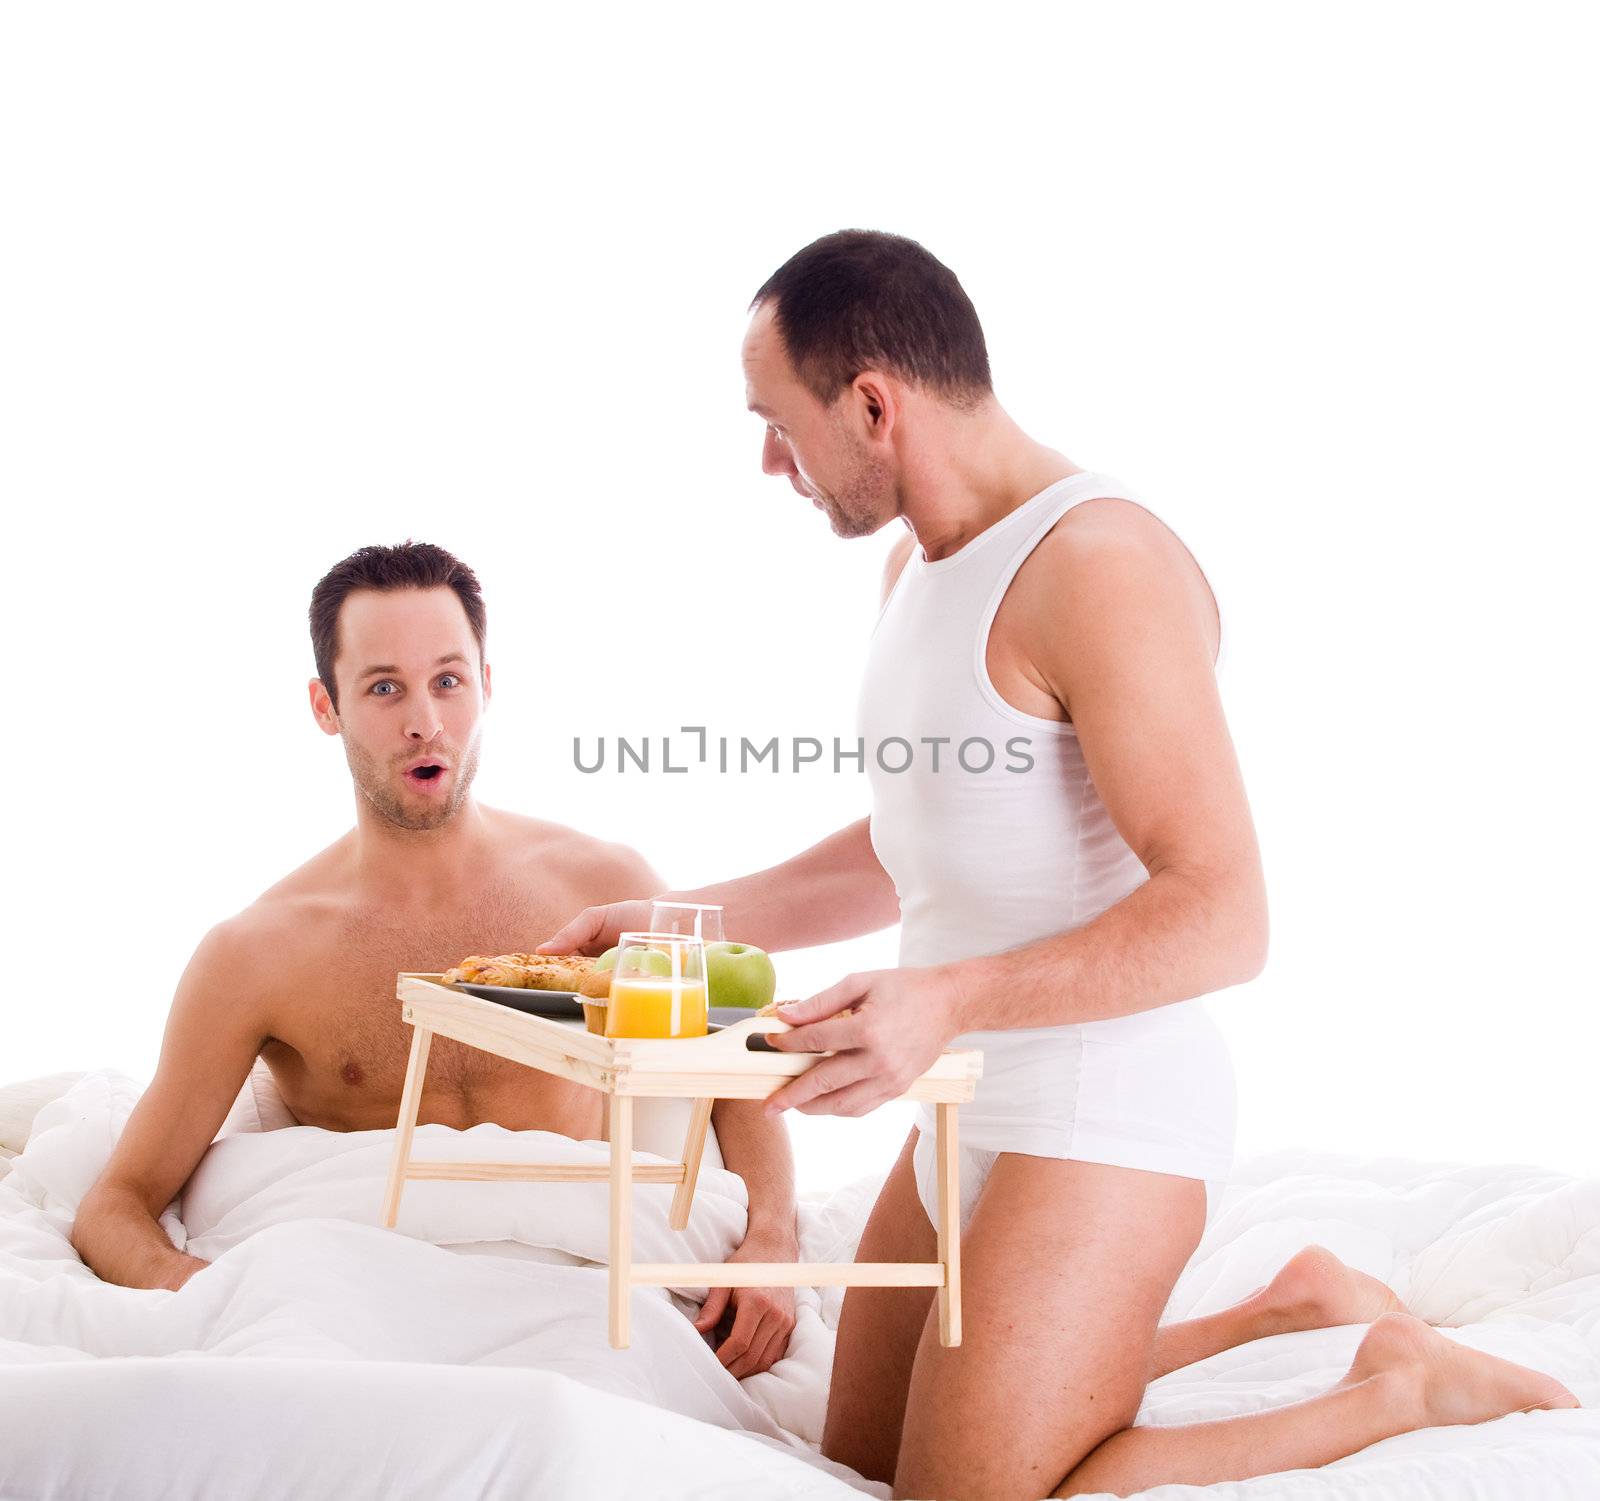 A Happy homo couple and their breakfast on a tray in bed